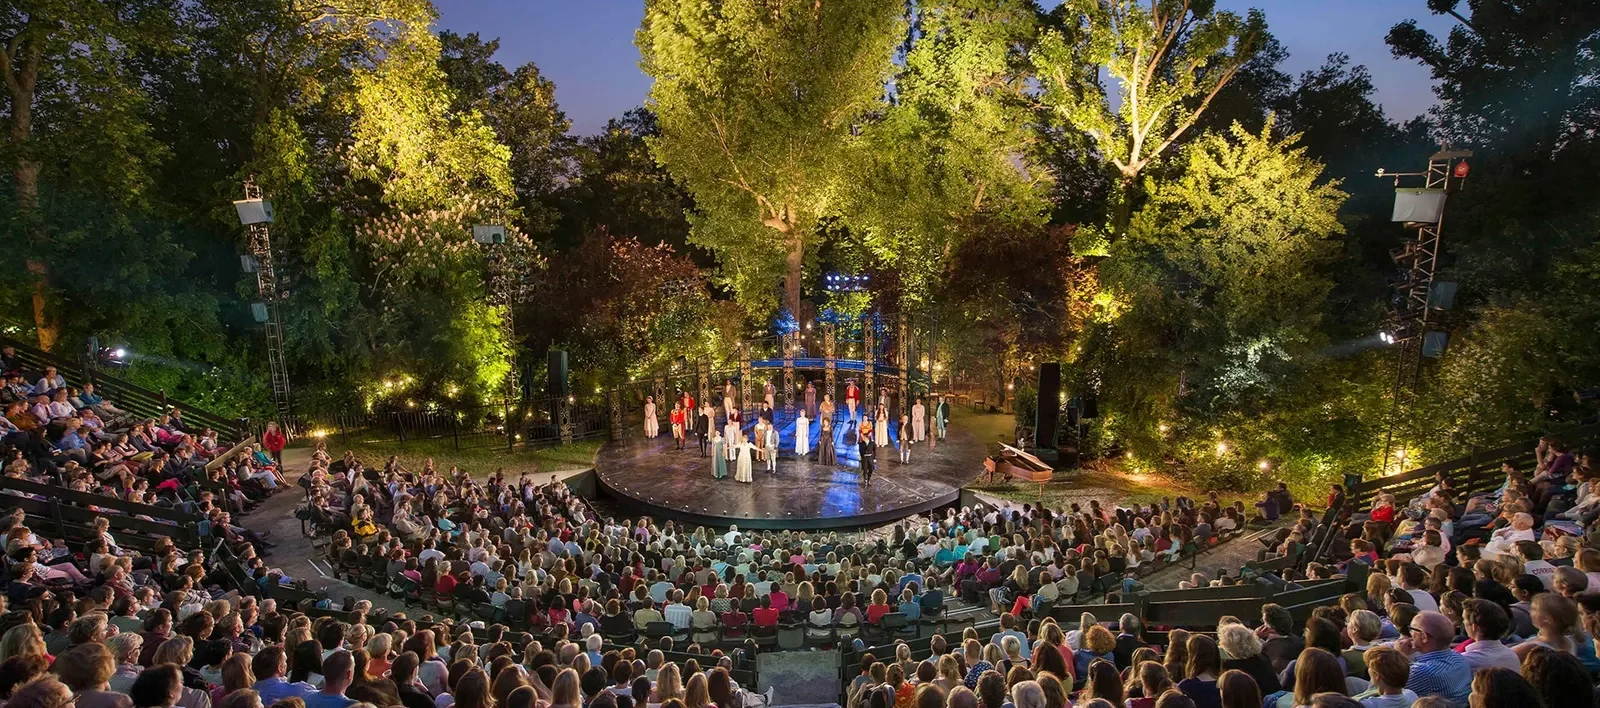 a picture of an outdoor theatre with a large audience